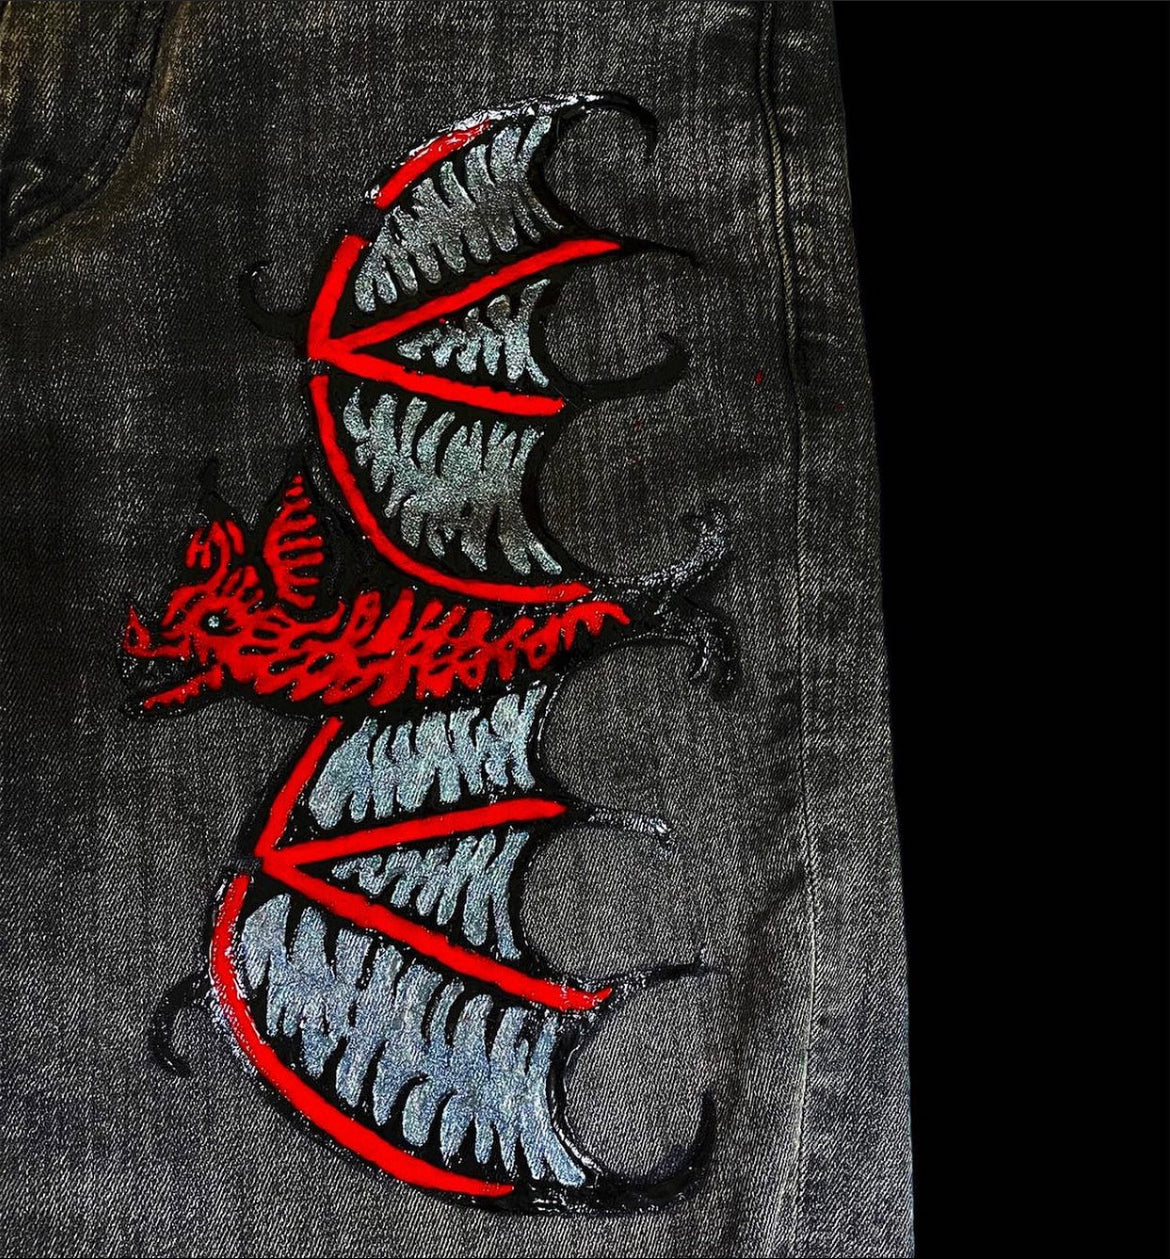 BLOOD LUST JEANS (1OF1) – JustifiedVisuals